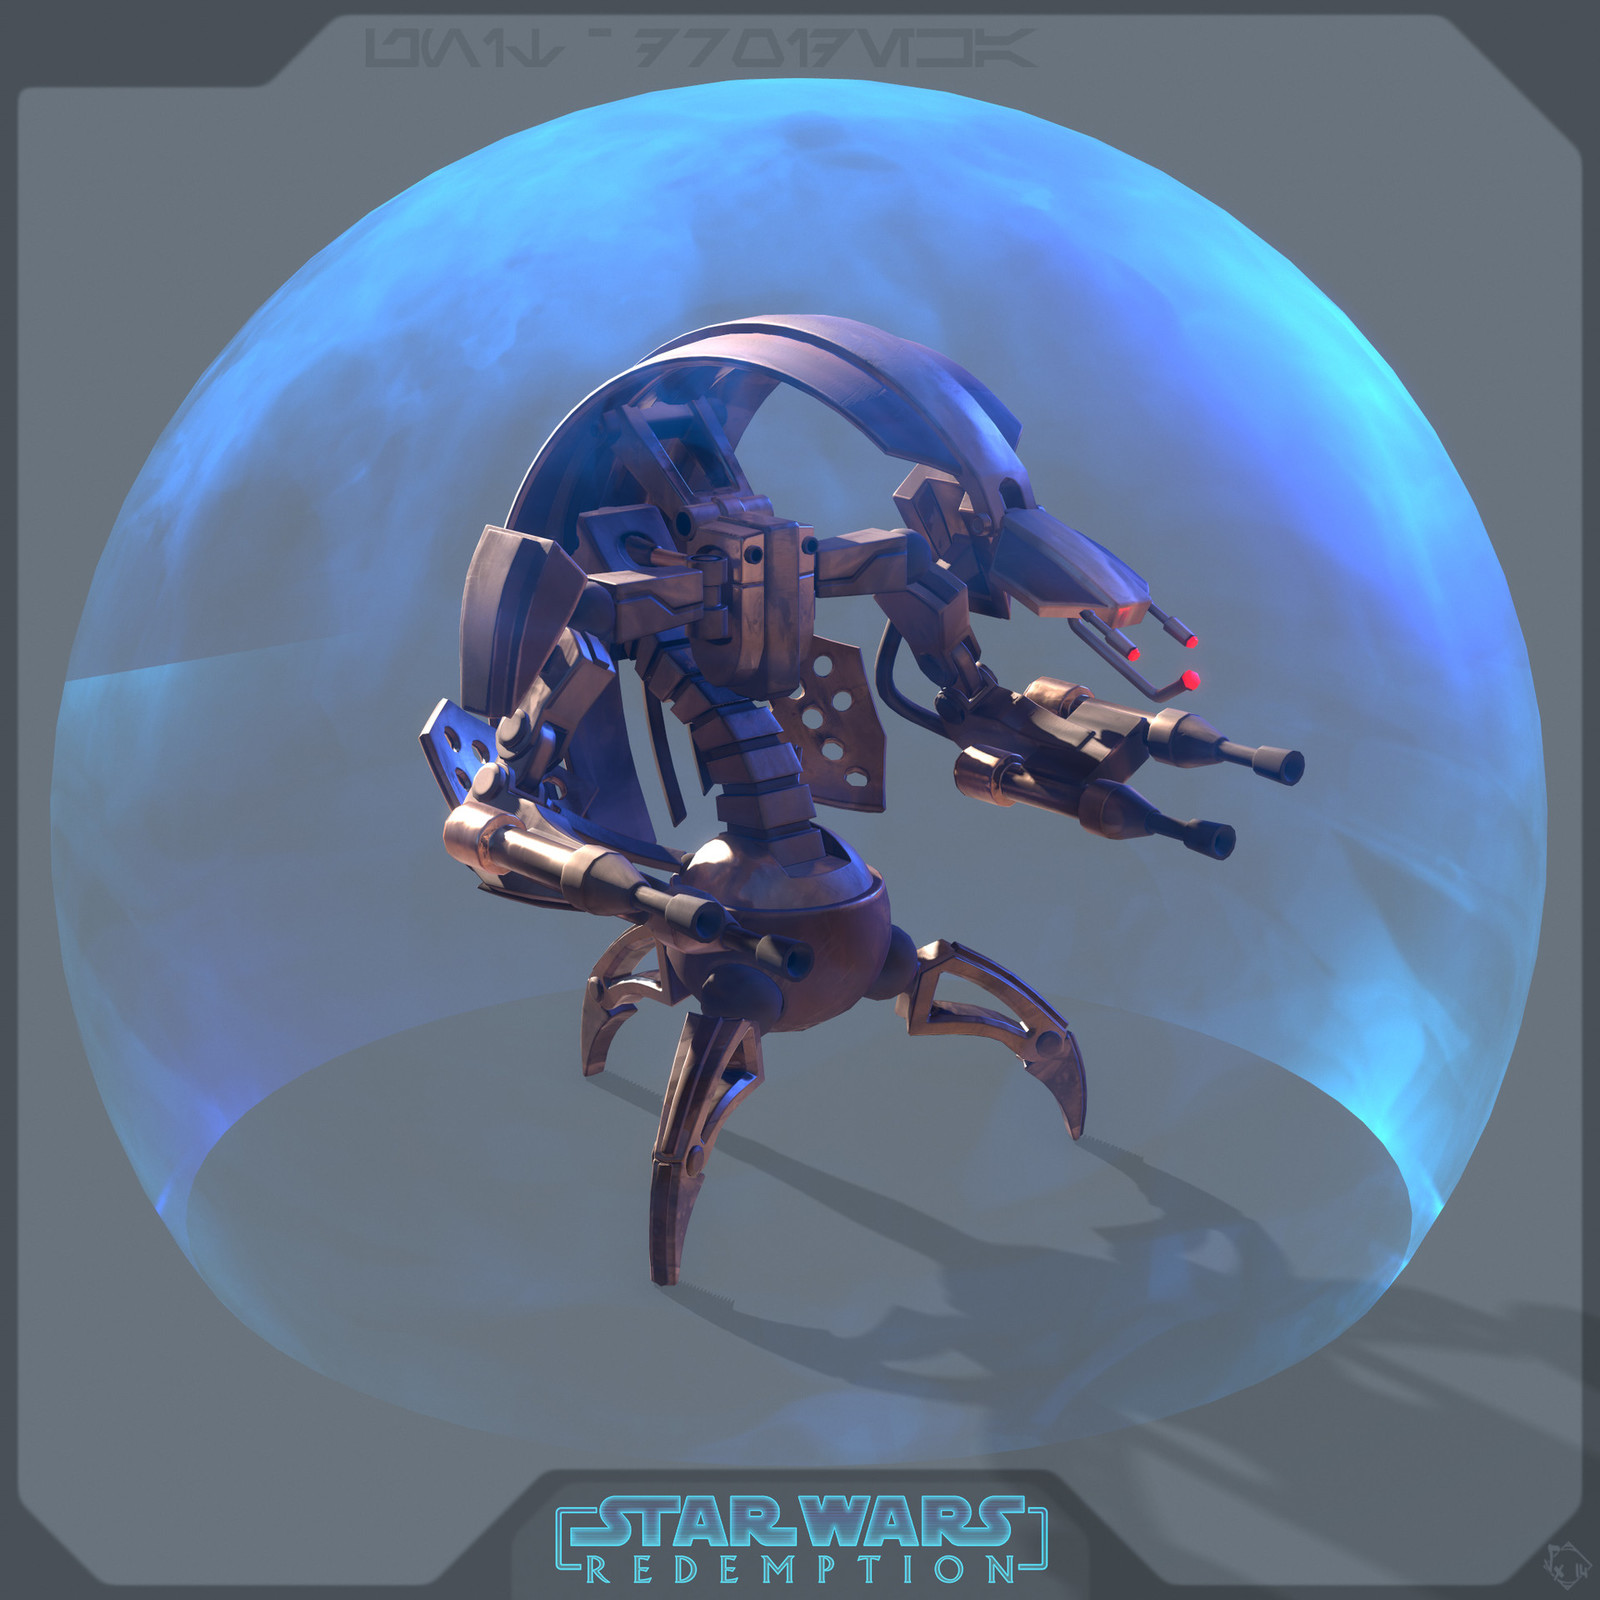 Droideka - Basic's Skin, made with 3dsMax/3DCoat, rig/skin and anim made with Akeytsu, normalmap bake &amp; render done with Marmoset Toolbag 3 ( this skin was of course inspired by the one we've all seen in the TV show ;)